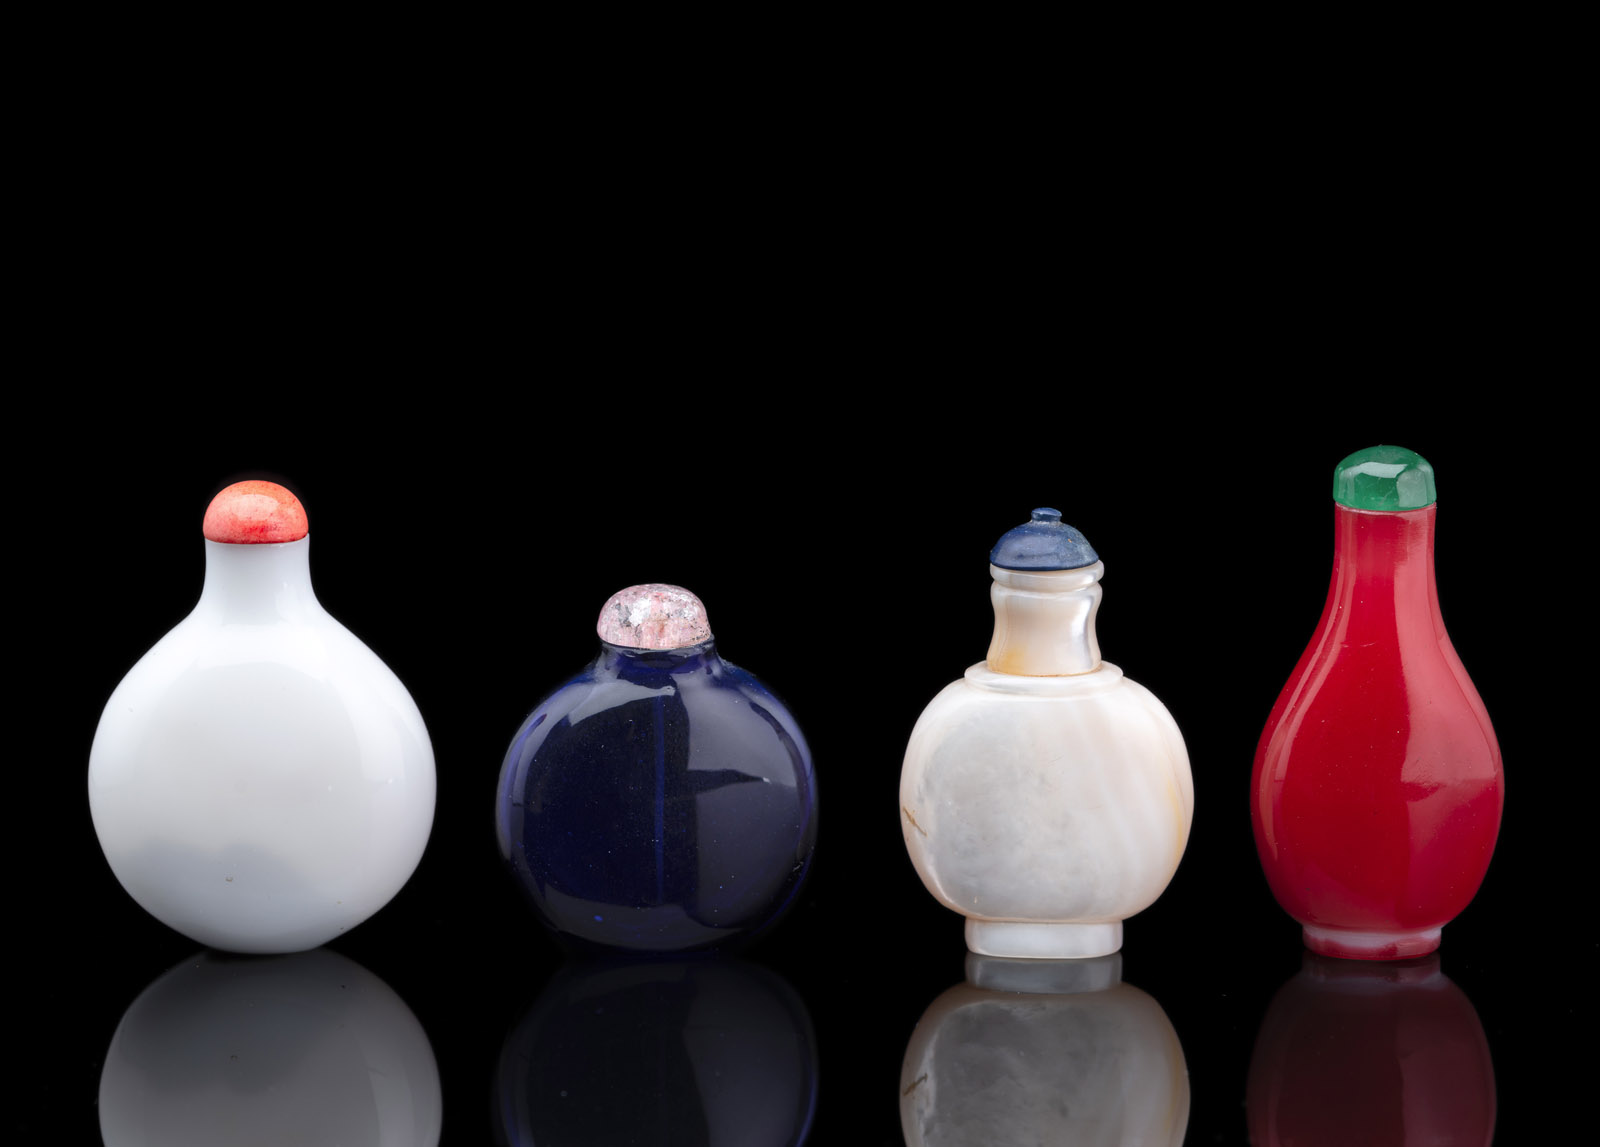 A GROUP OF THREE MONOCHROME GLASS SNUFFBOTTLES AND A MOTHER-OF-PEARL SNUFFBOTTLE